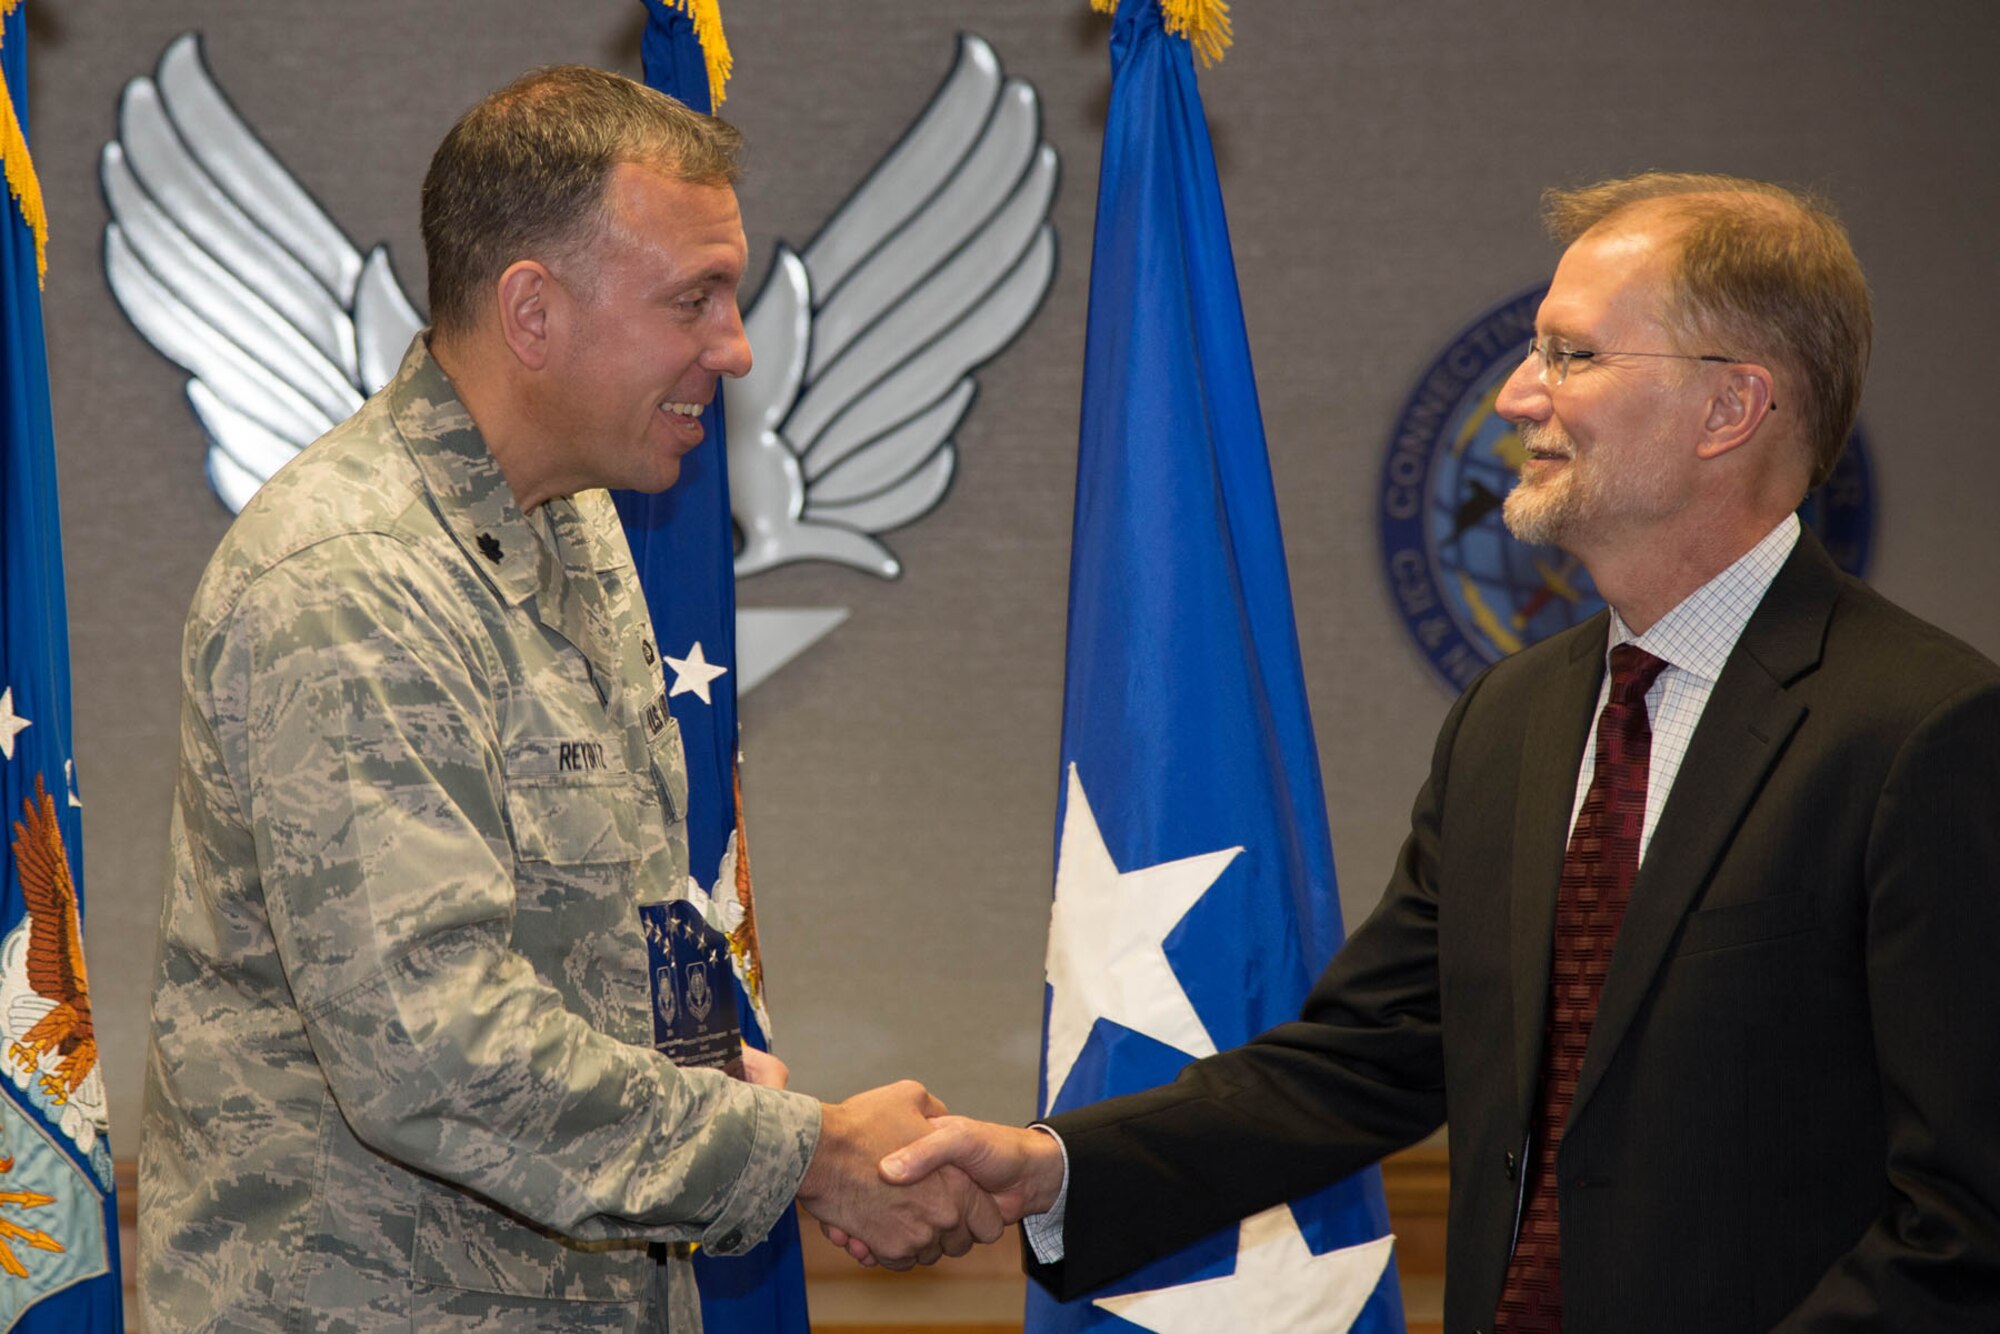 Steven Wert, Battle Management program executive officer, congratulates Lt. Col. Kyle Reybitz, Air and Space Operations Center Weapon System branch chief, during the Air Force Life Cycle Management Center Acquisition Management Awards Oct. 29. Reybitz won the Journeyman Program Management Award in acquisition or services I or non-delegated II category for his work commanding and leading the AOC WS transition. (U.S. Air Force photo by Mark Herlihy) 
